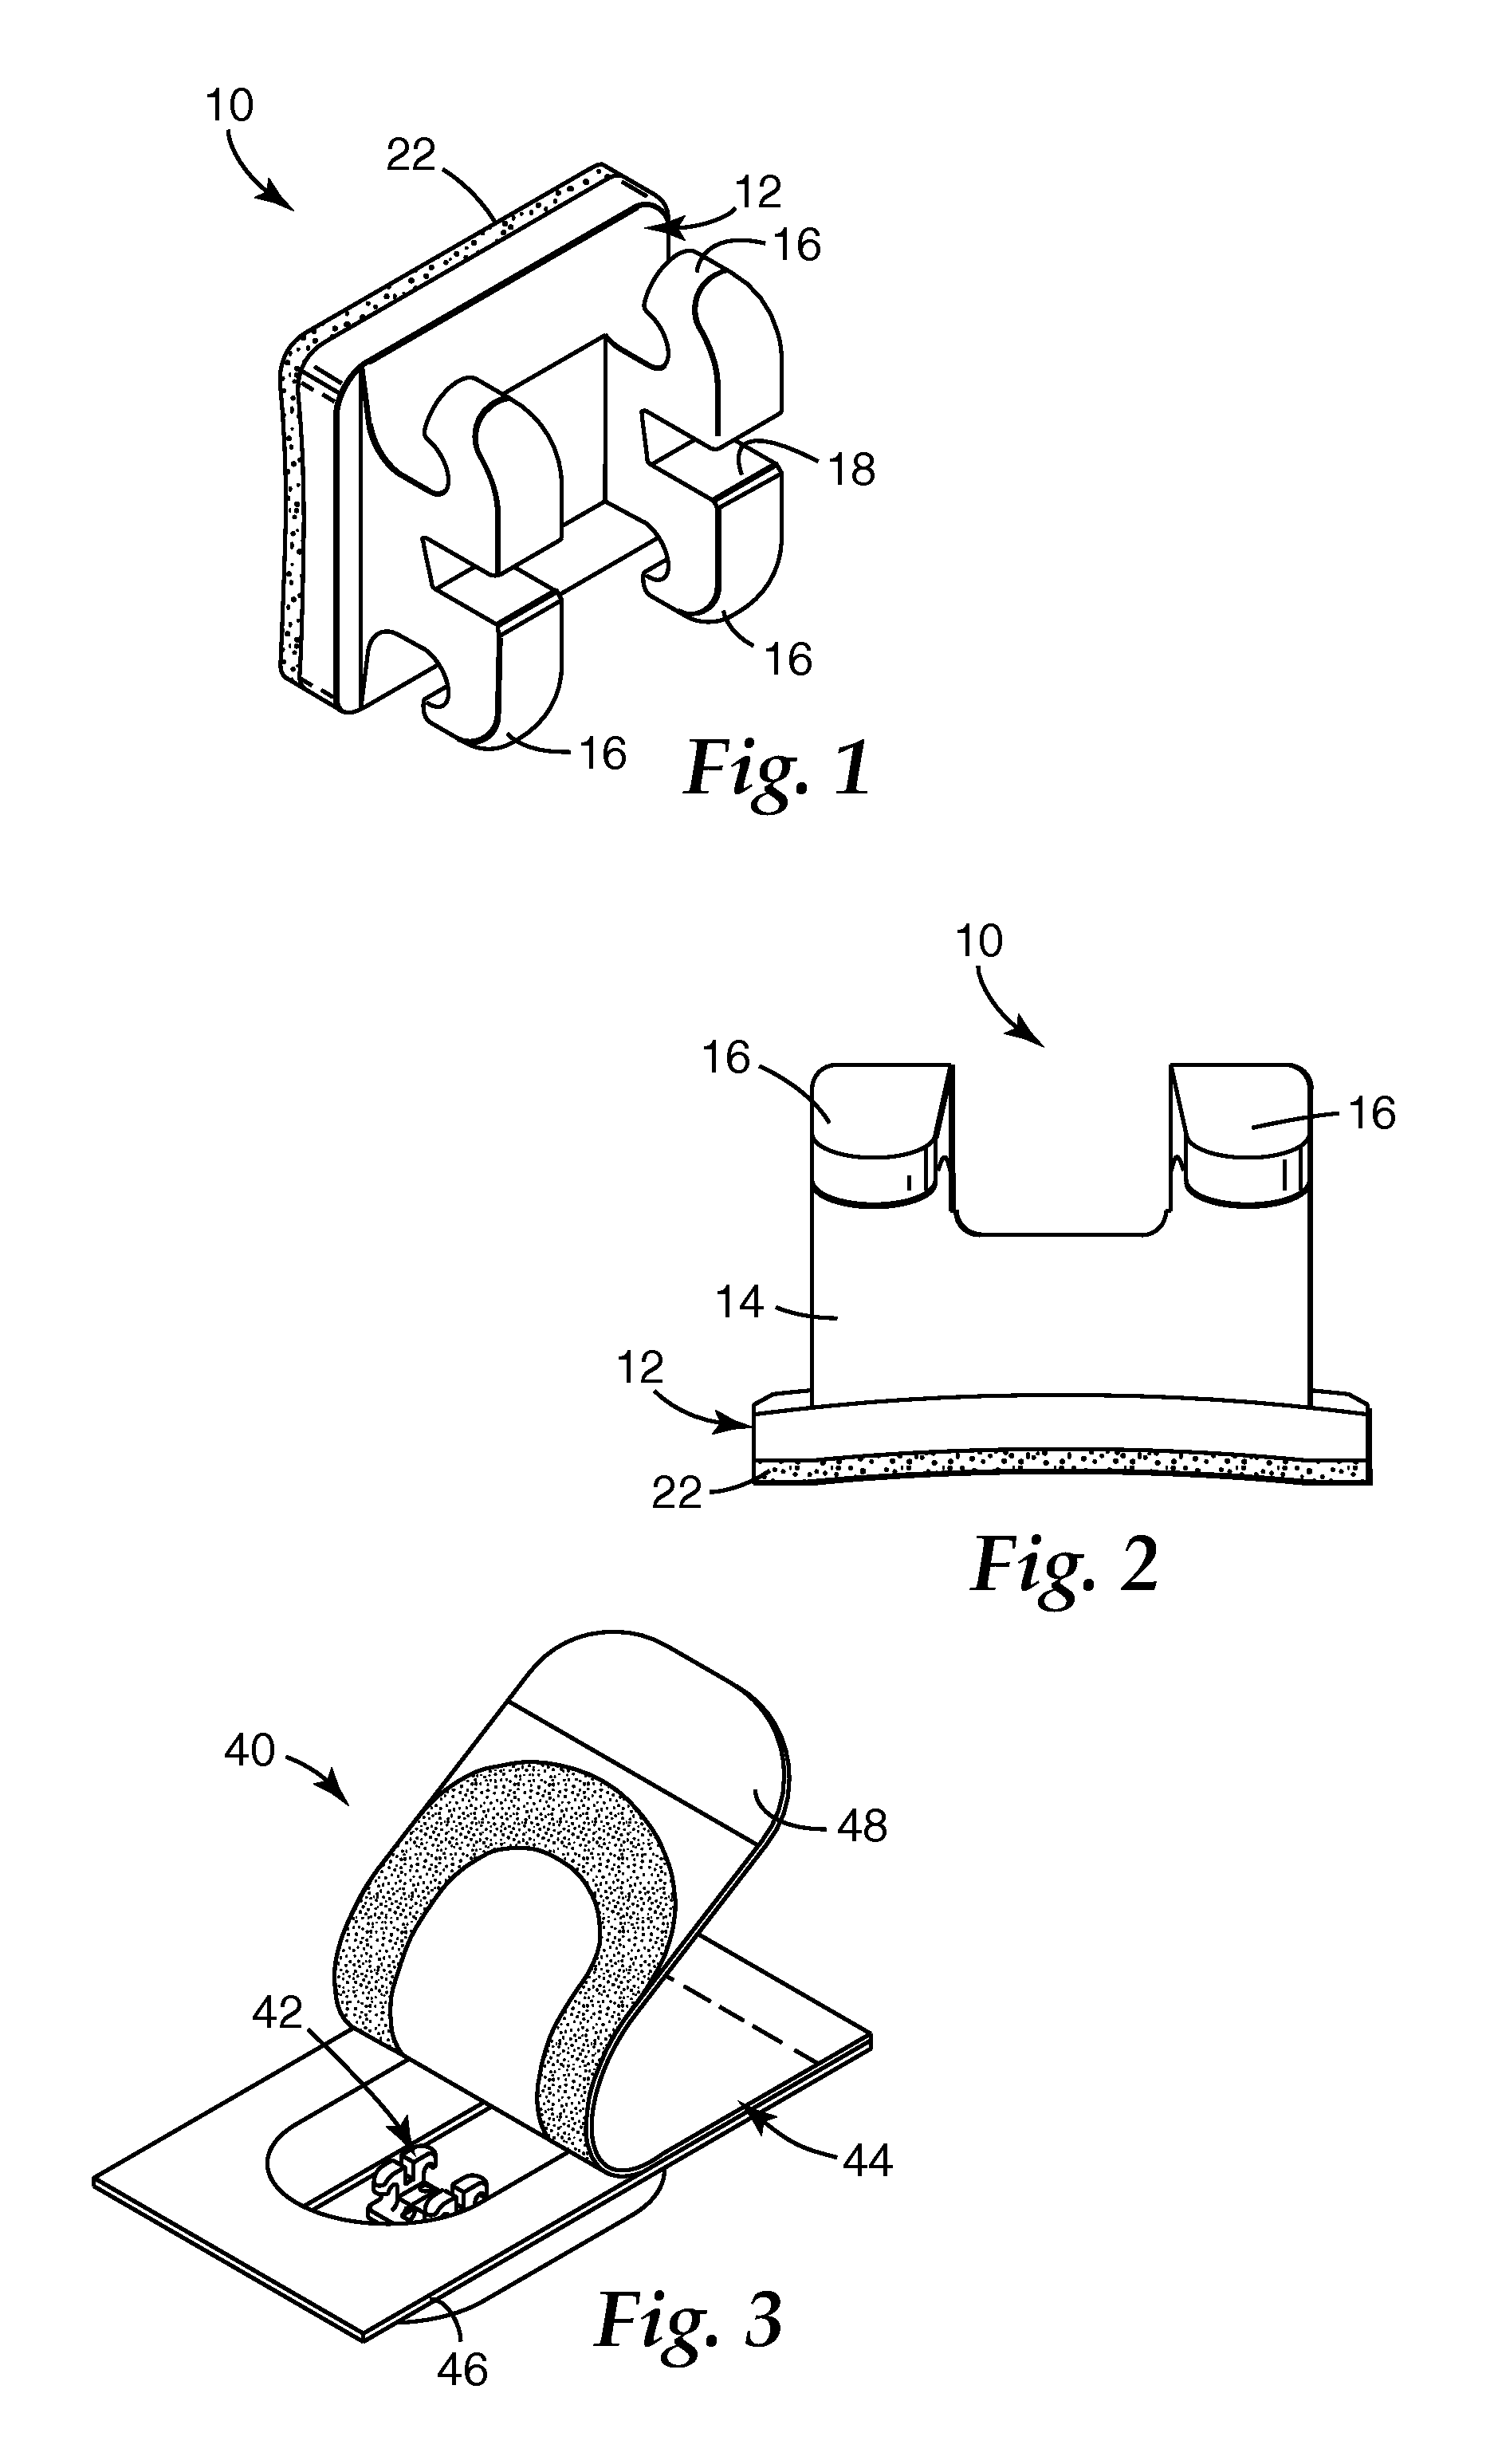 Dental compositions including a thermally labile component, and the use thereof